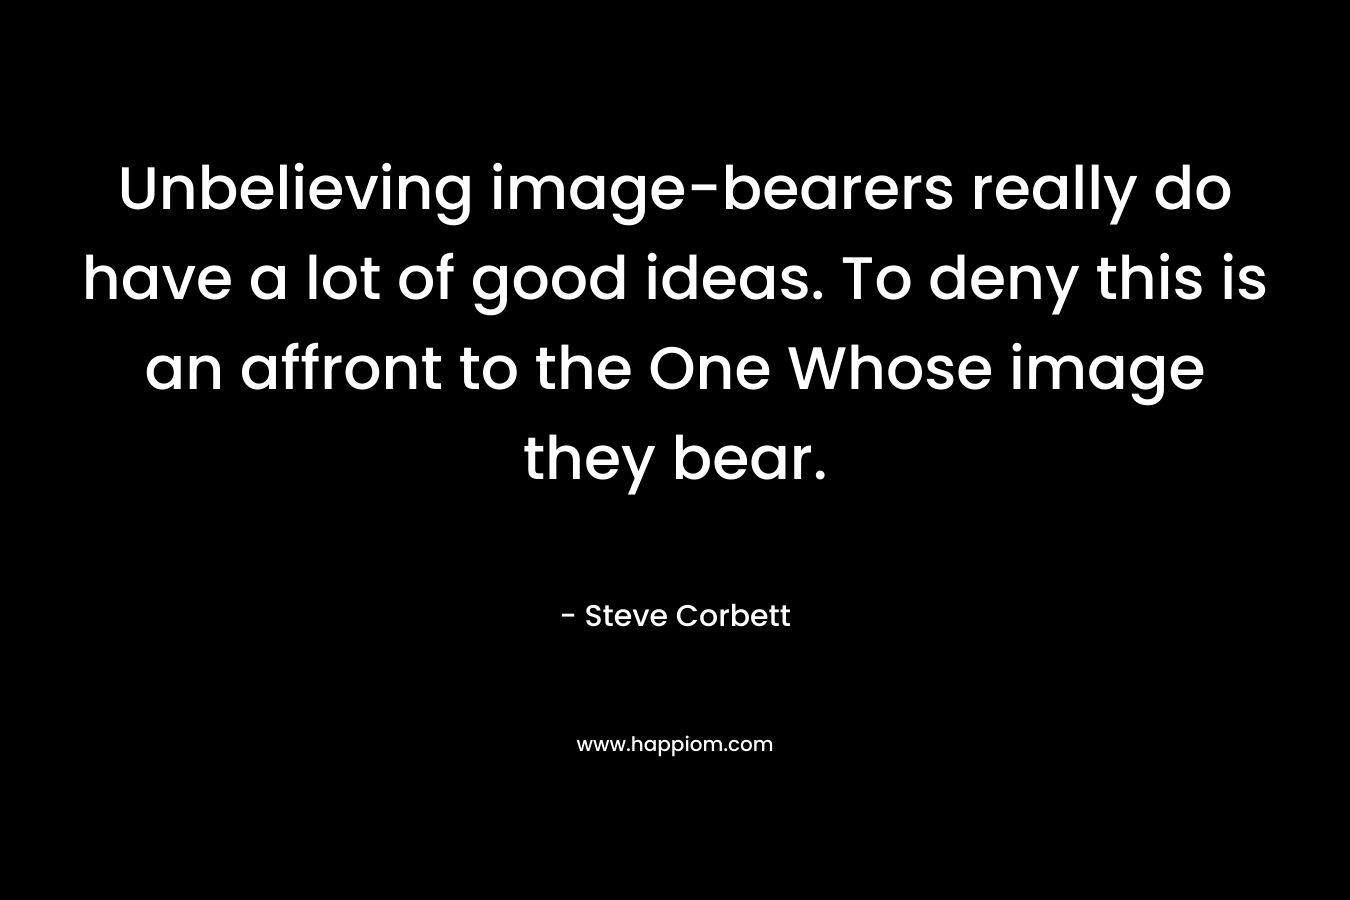 Unbelieving image-bearers really do have a lot of good ideas. To deny this is an affront to the One Whose image they bear. – Steve Corbett